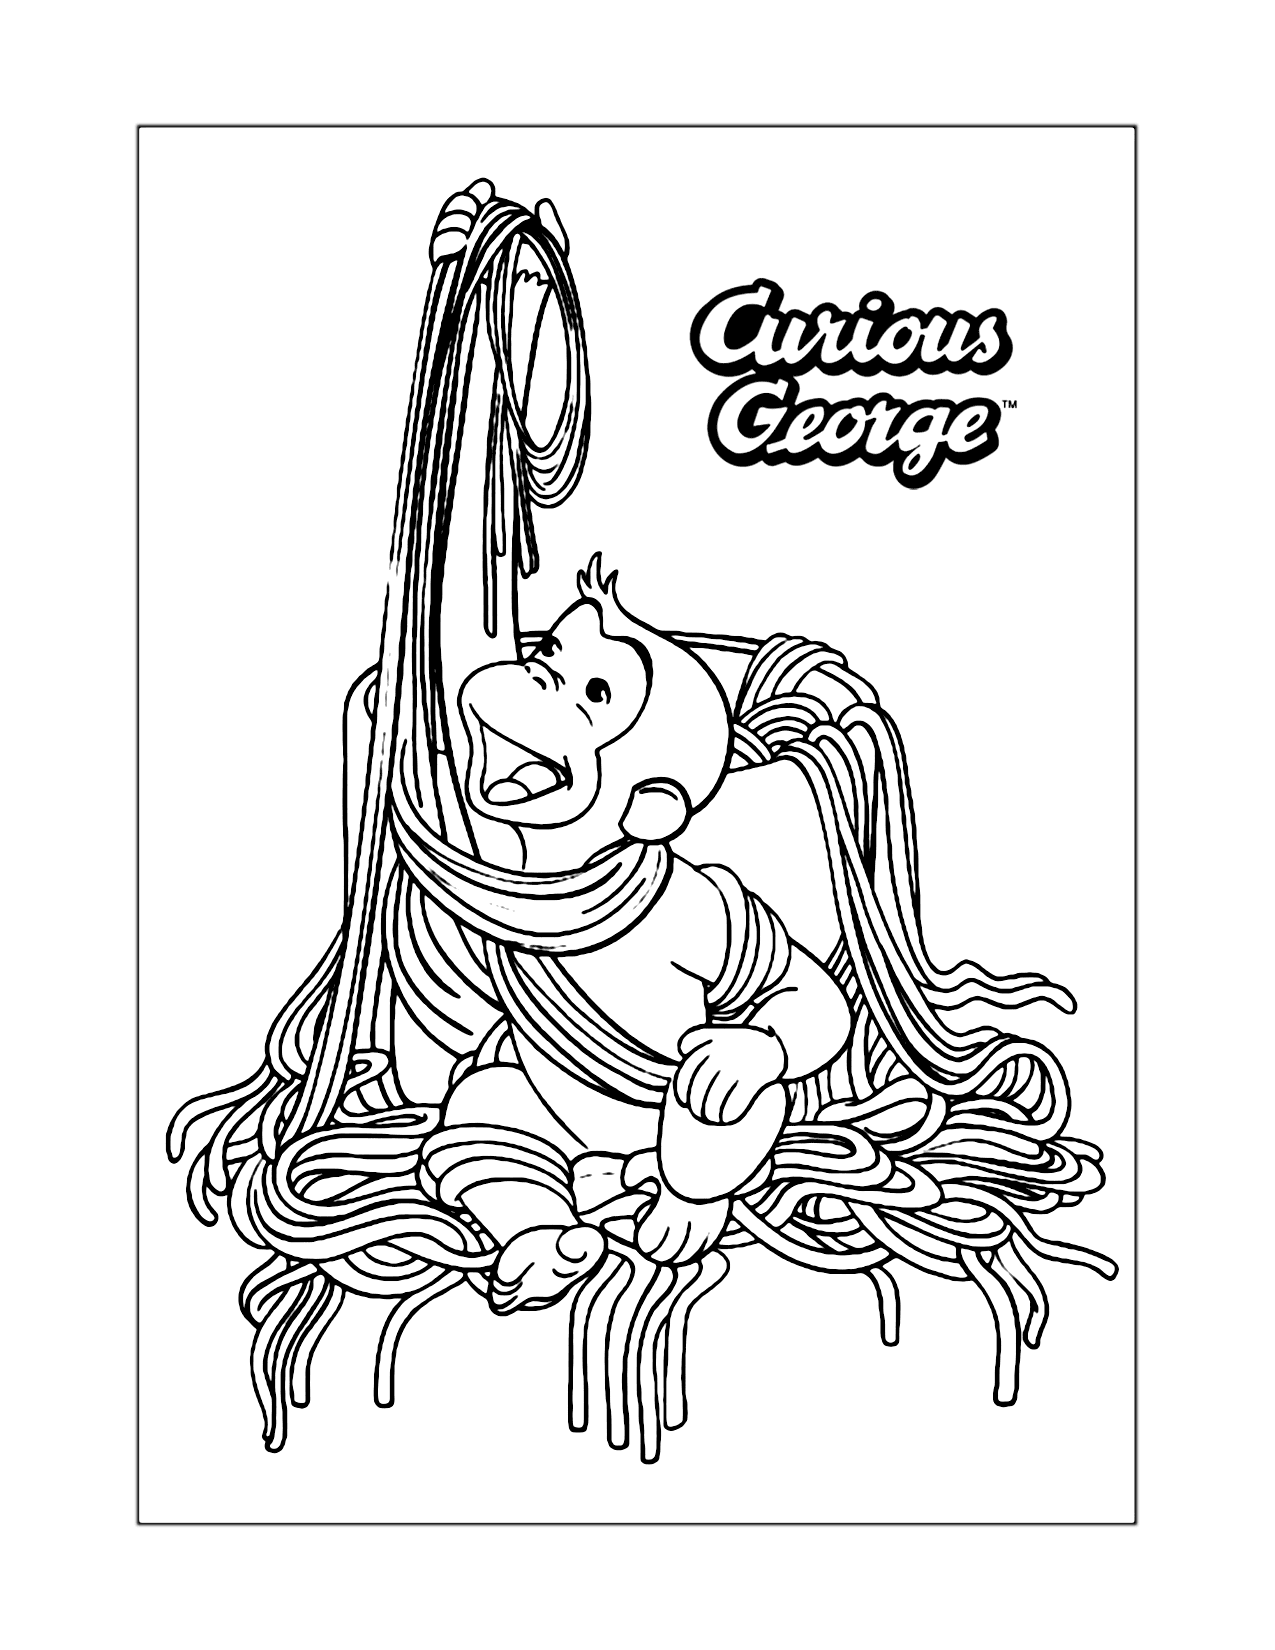 Curious George Eating Spaghetti Coloring Page